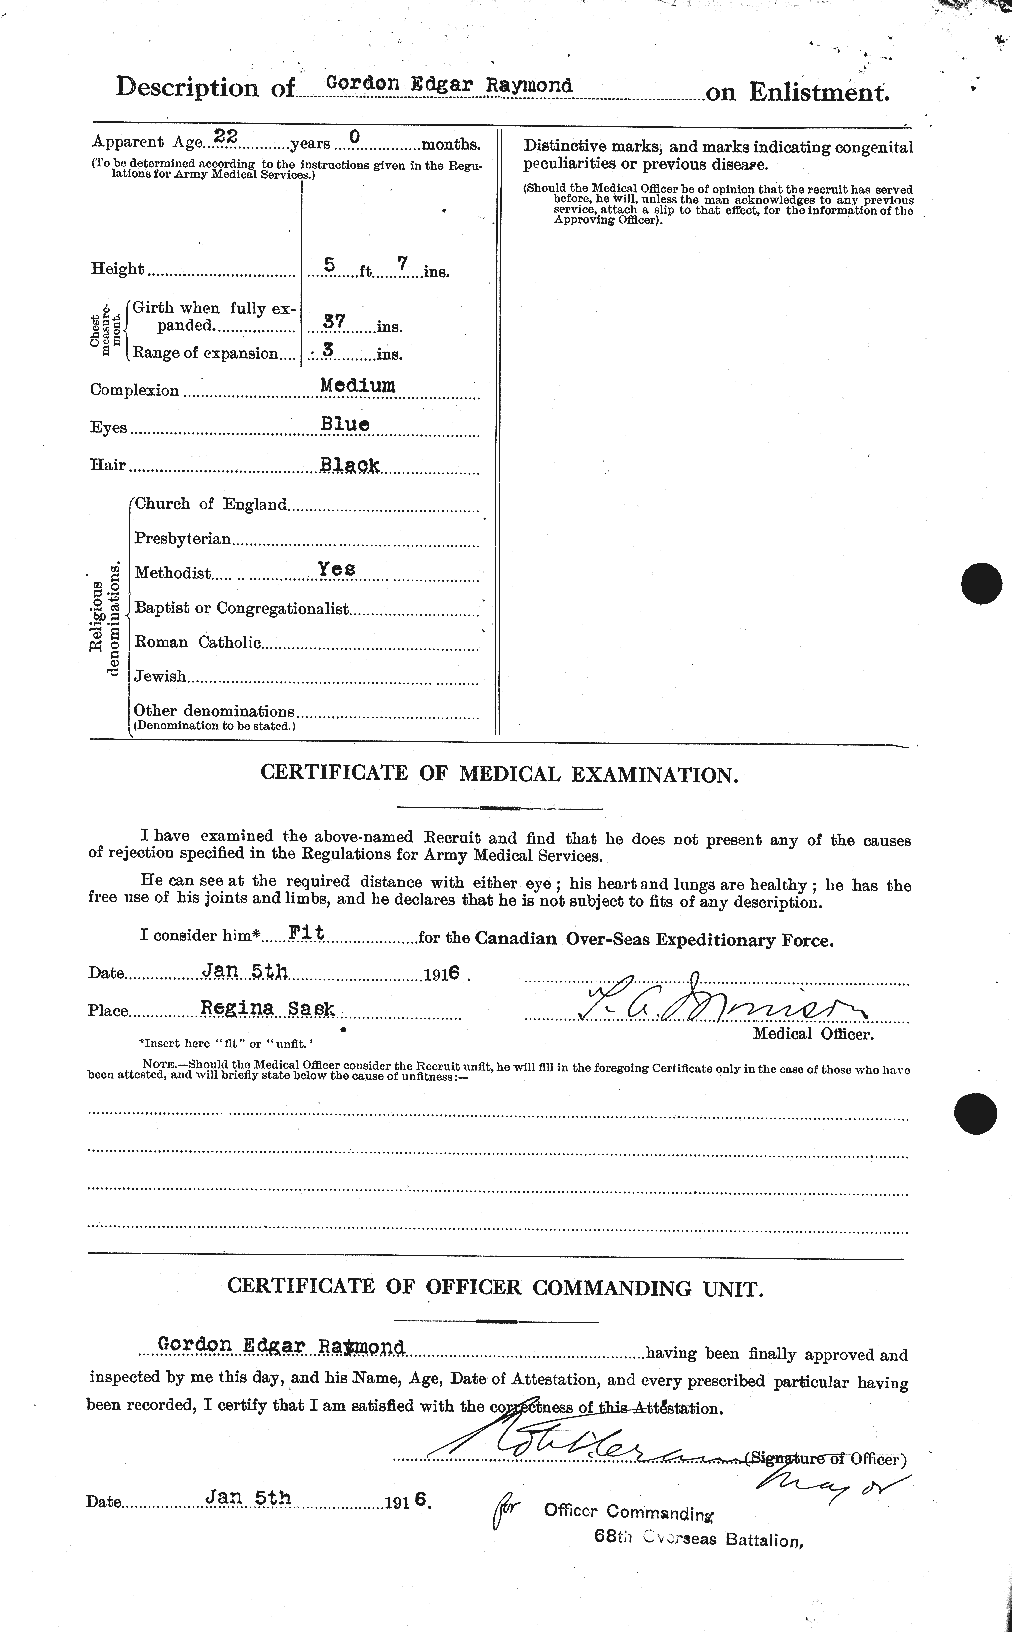 Personnel Records of the First World War - CEF 595347b